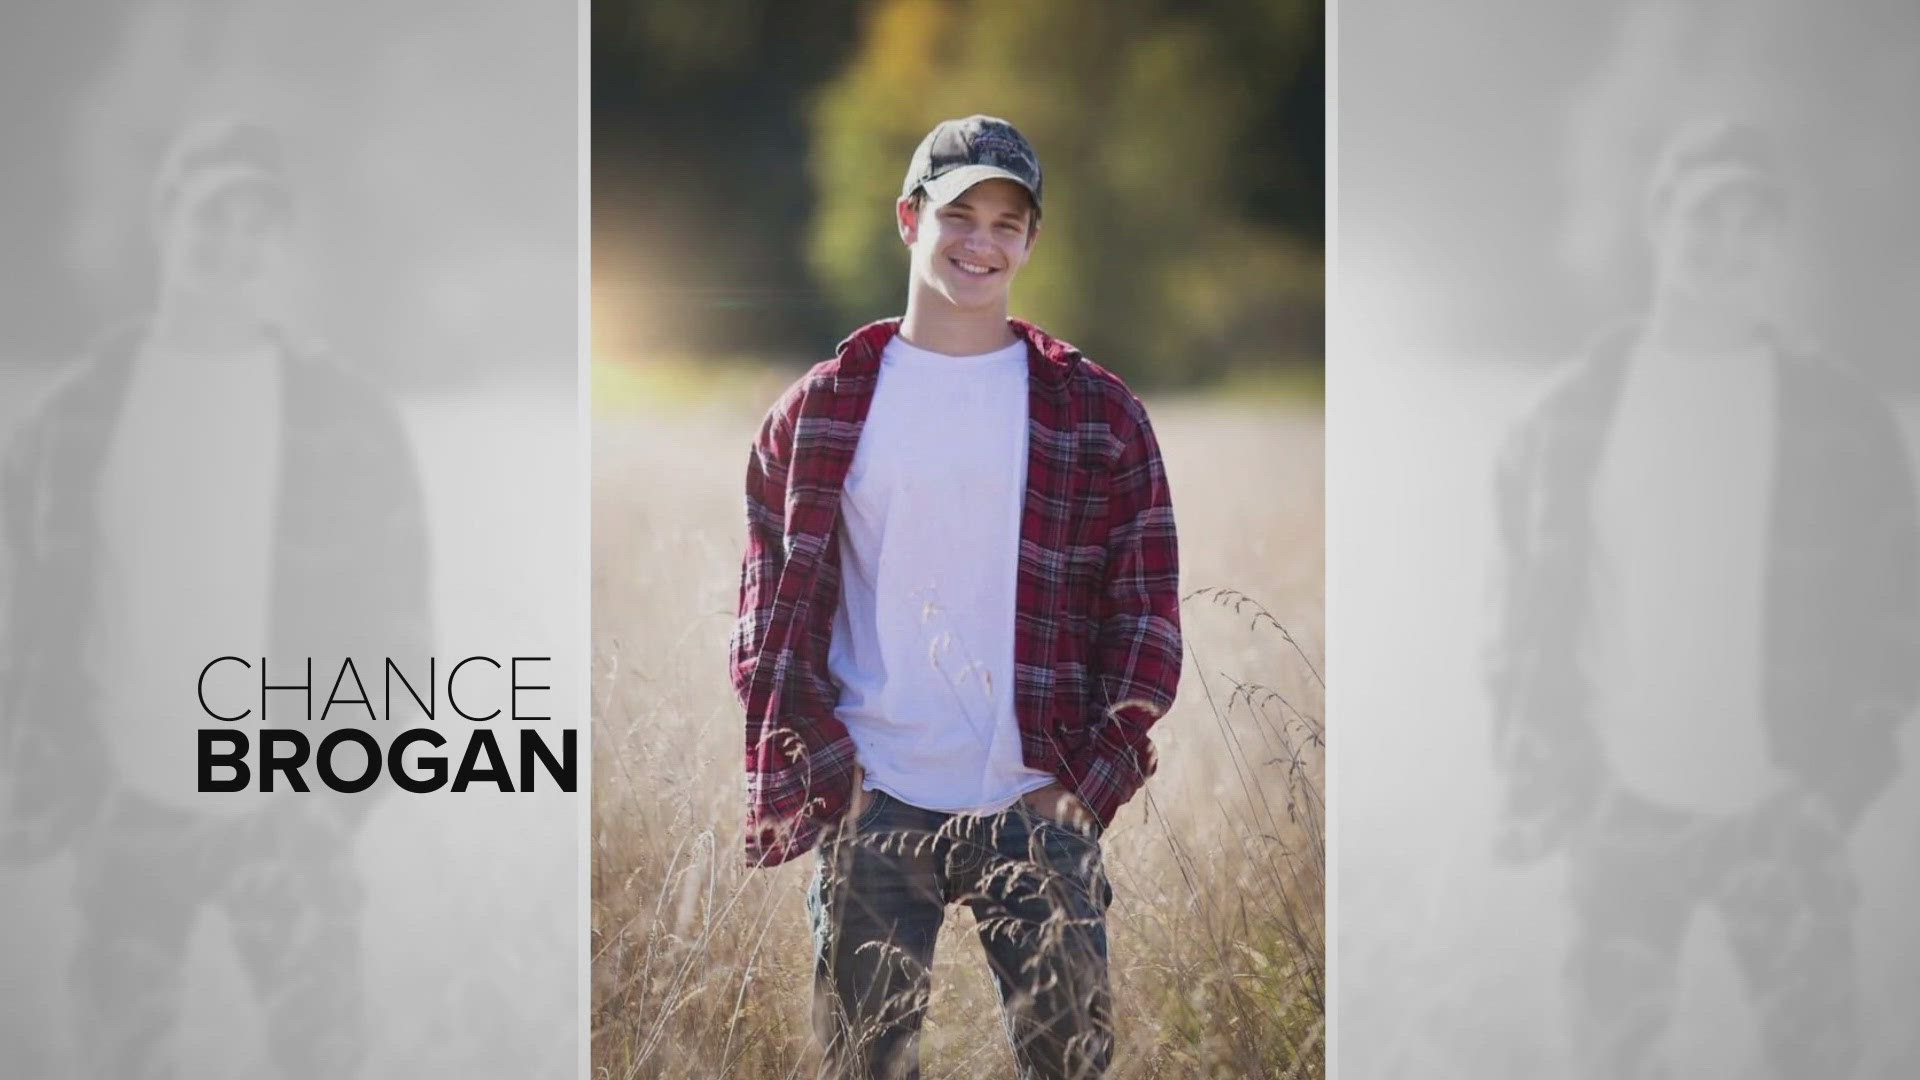 Chance Brogan died by suicide two years ago when he was 22 years old. His family hopes to have the Chance Brogan Memorial Stadium ready for kickoff in fall of 2025.